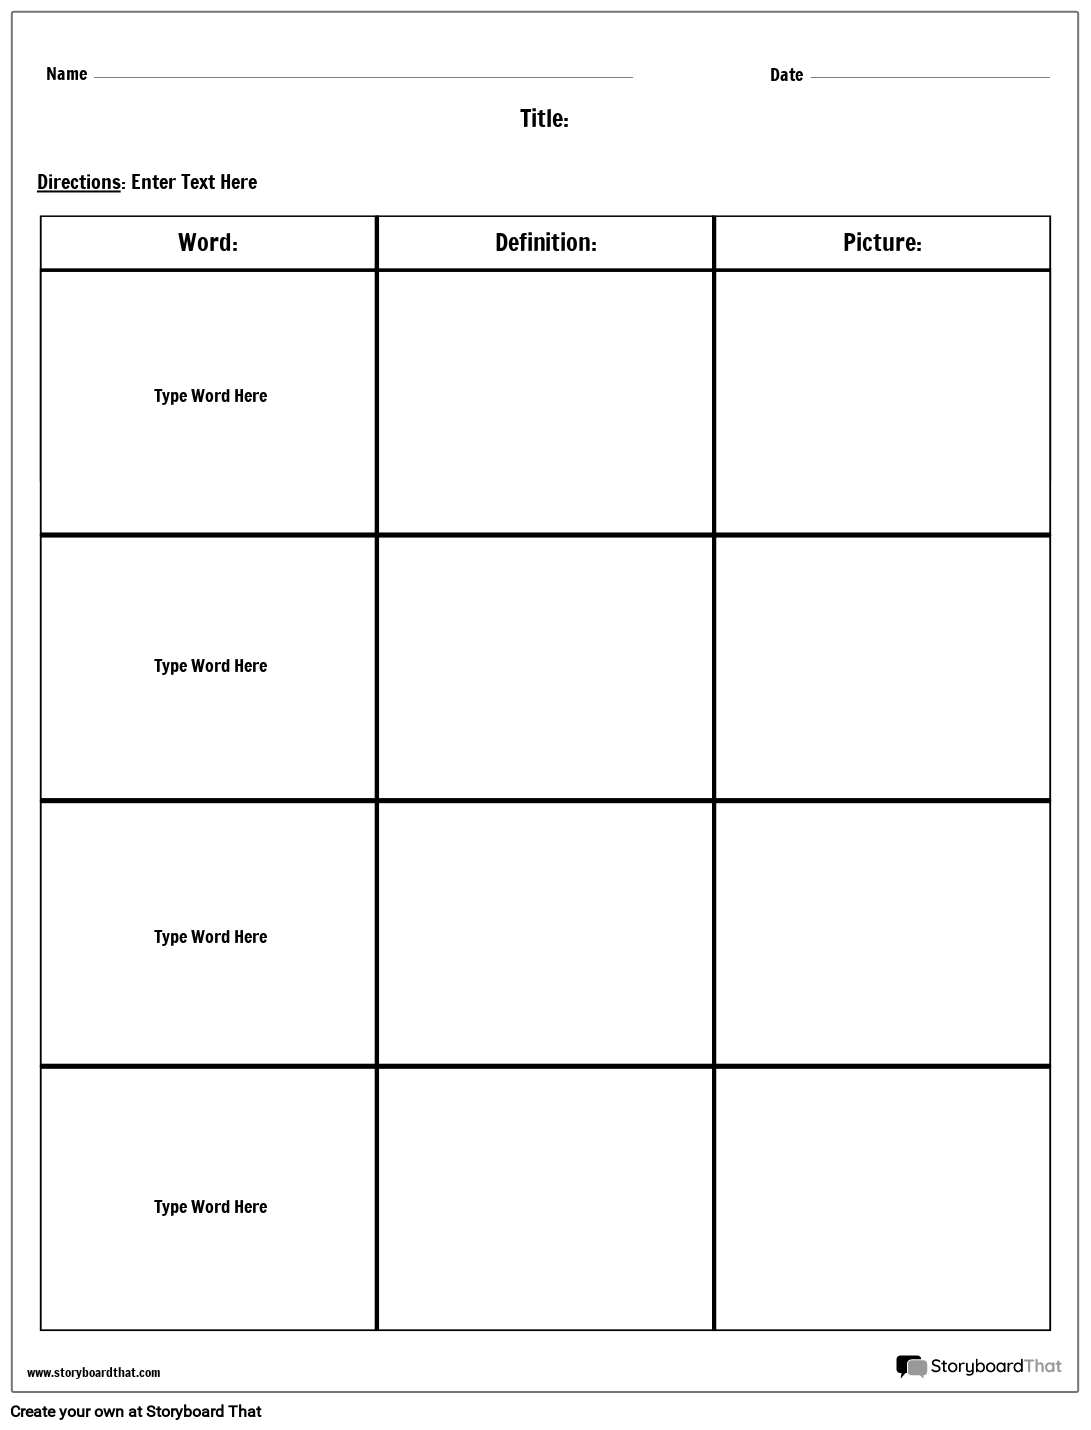 writing-your-own-definitions-worksheet-education-com-build-vocabulary-word-meaning-and